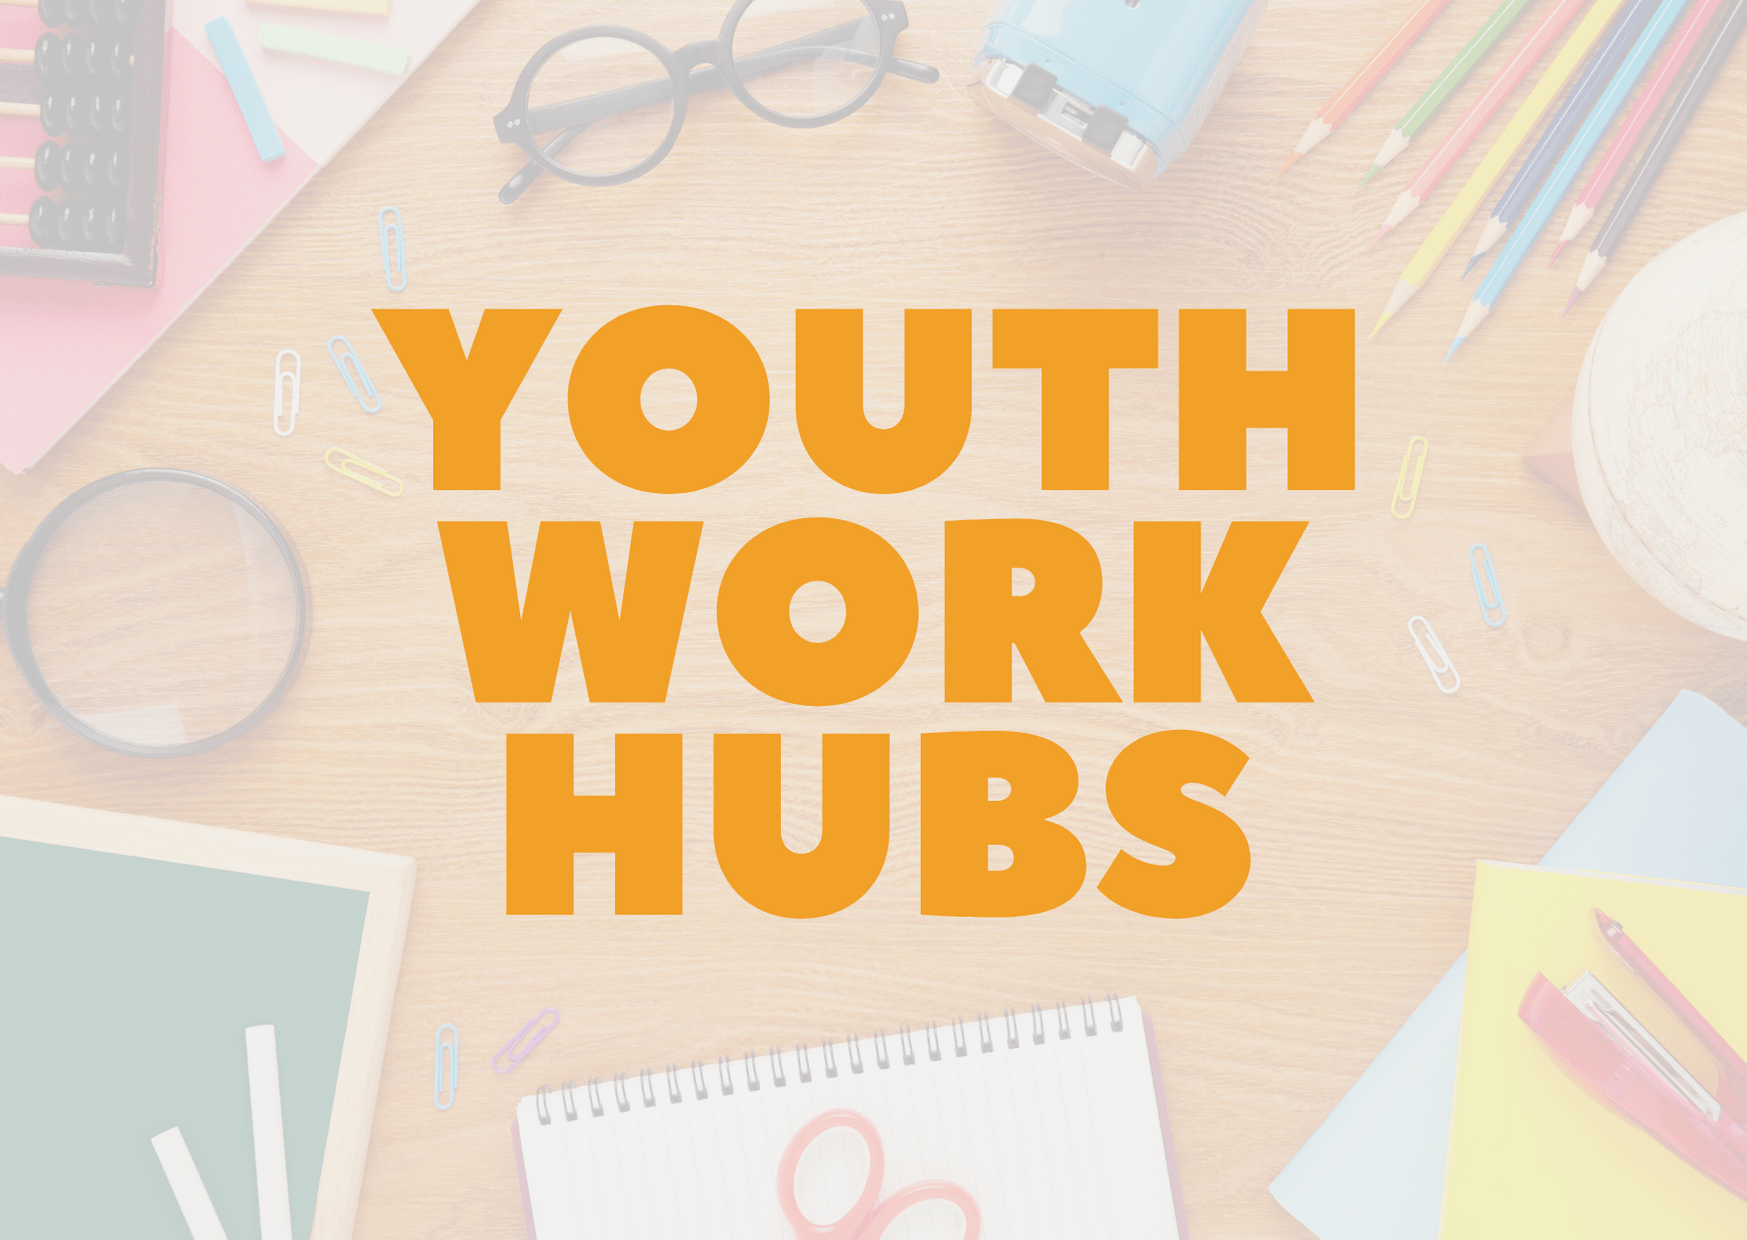 Youth Work HUBs